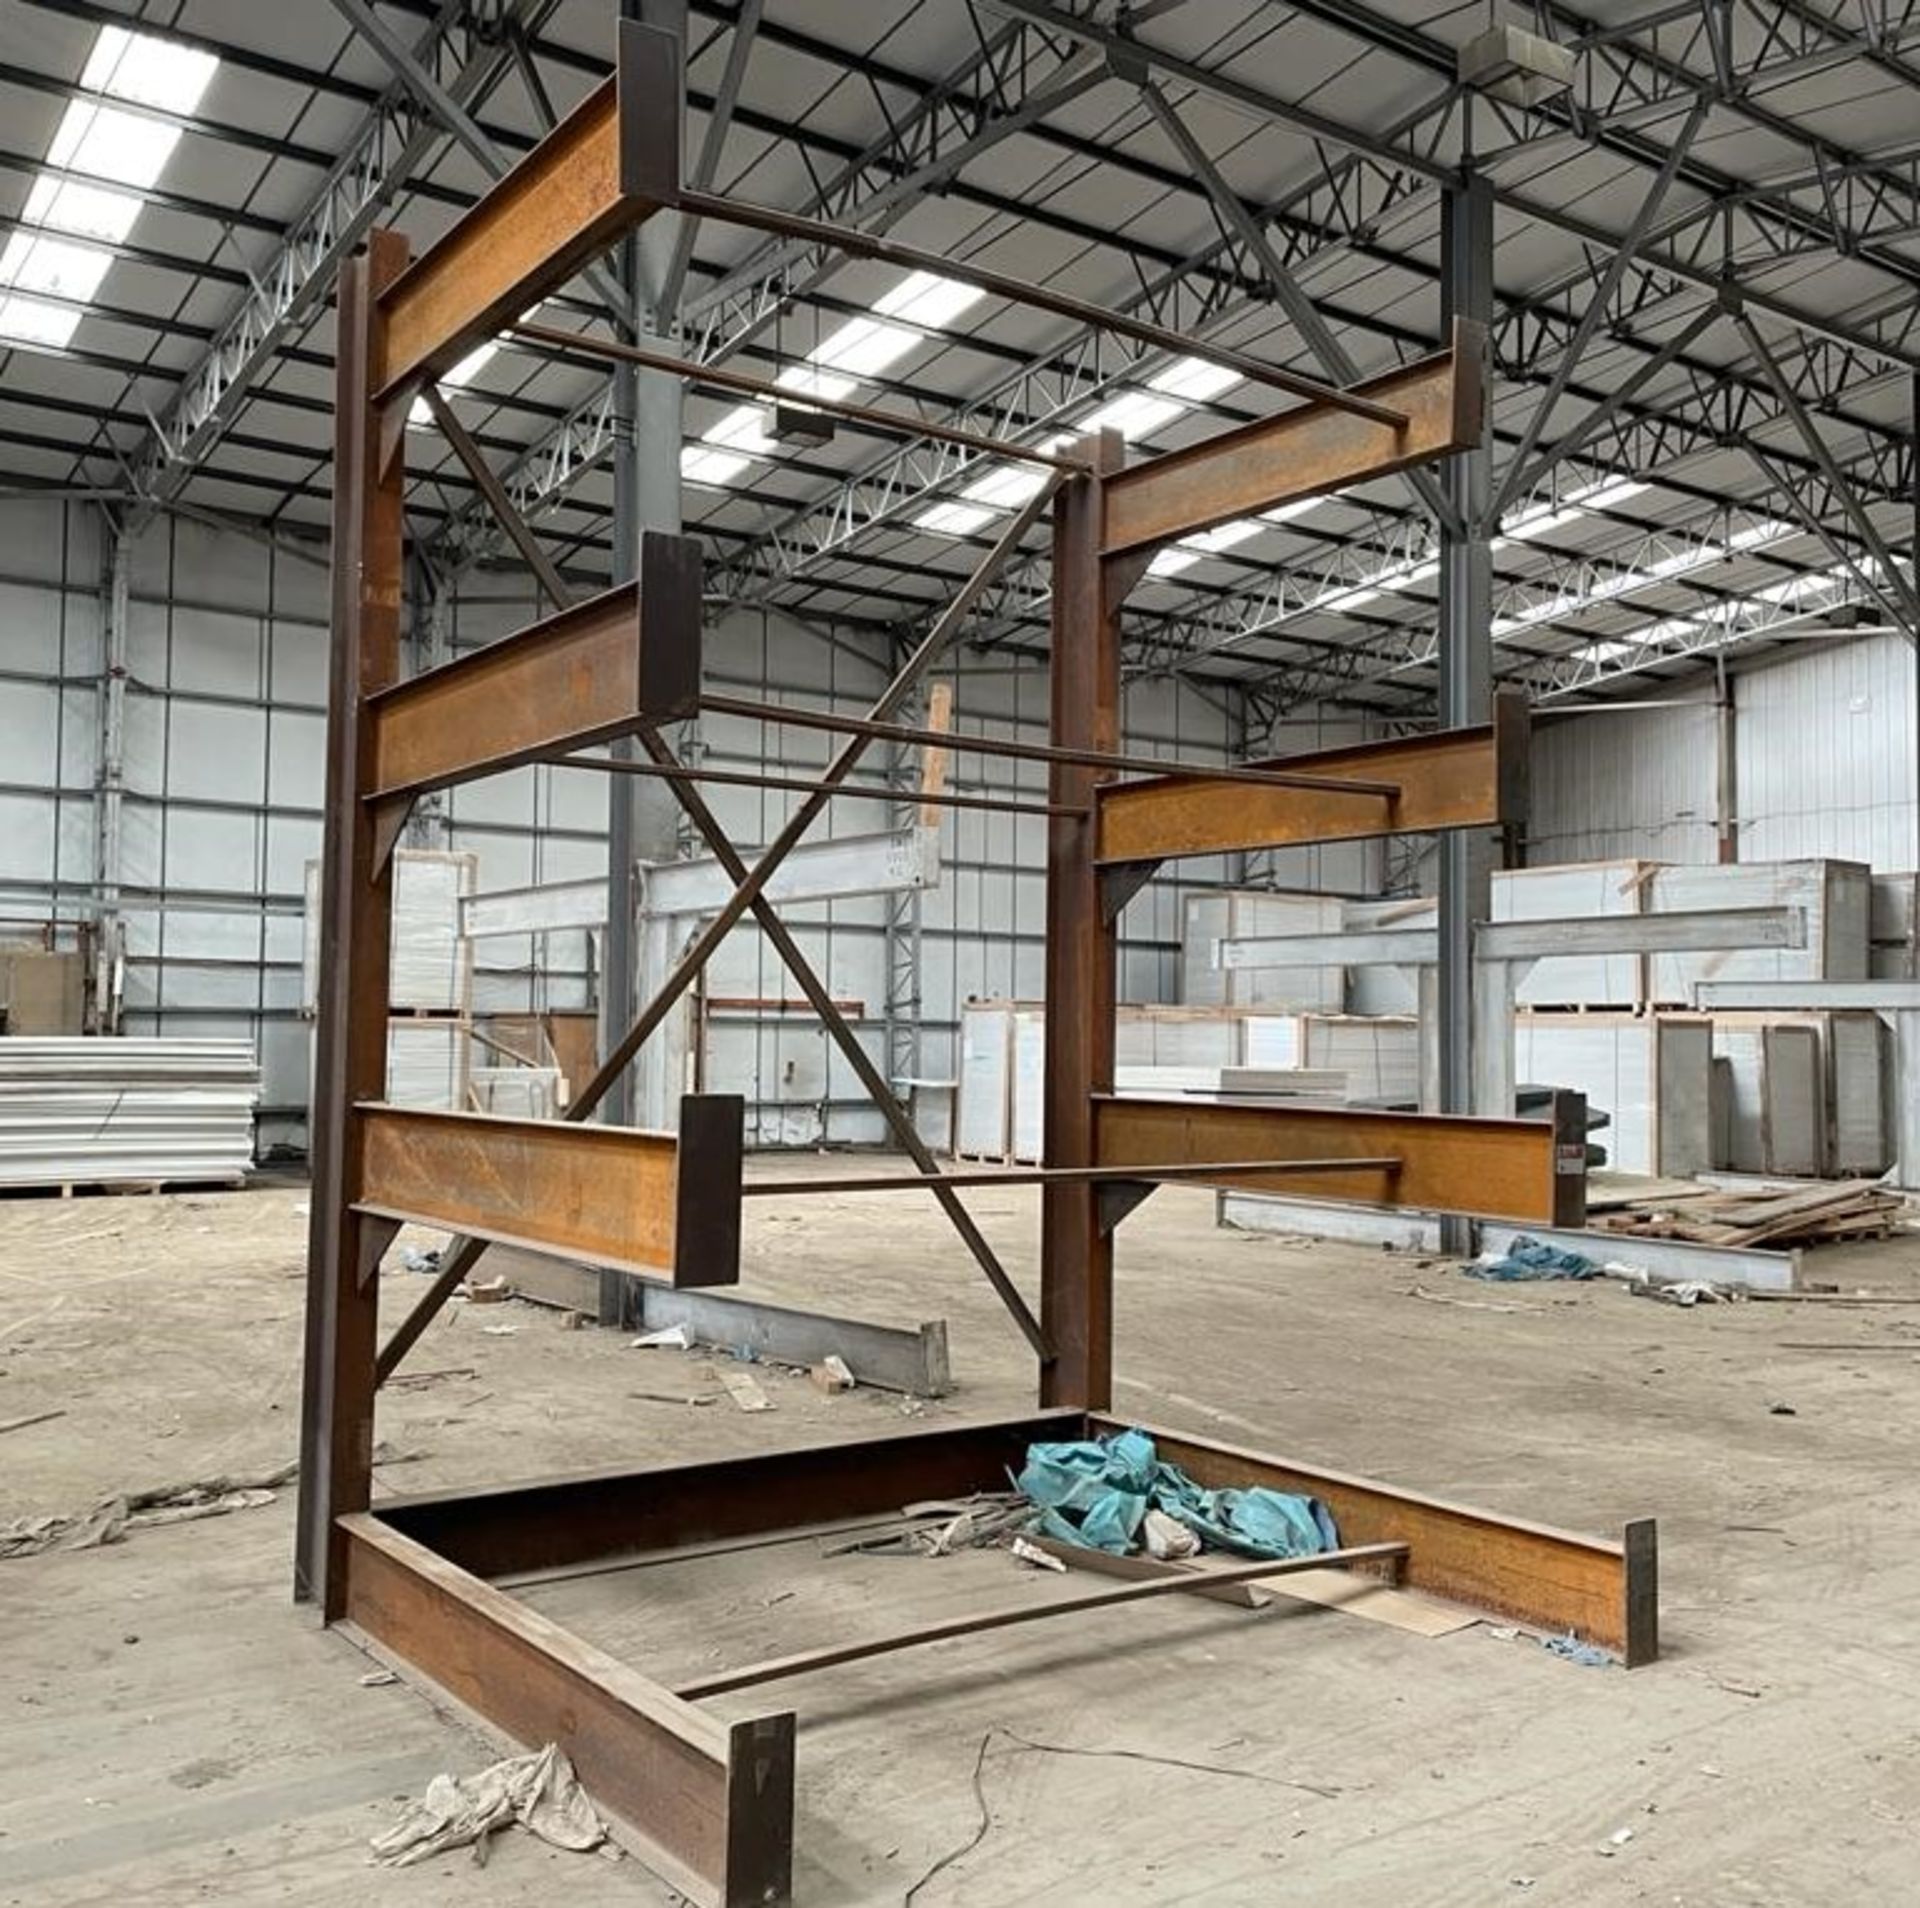 1 x Heavy Duty Cantilever Racking Unit - Ideal For Builders Merchants or Warehouses - Dimensions: